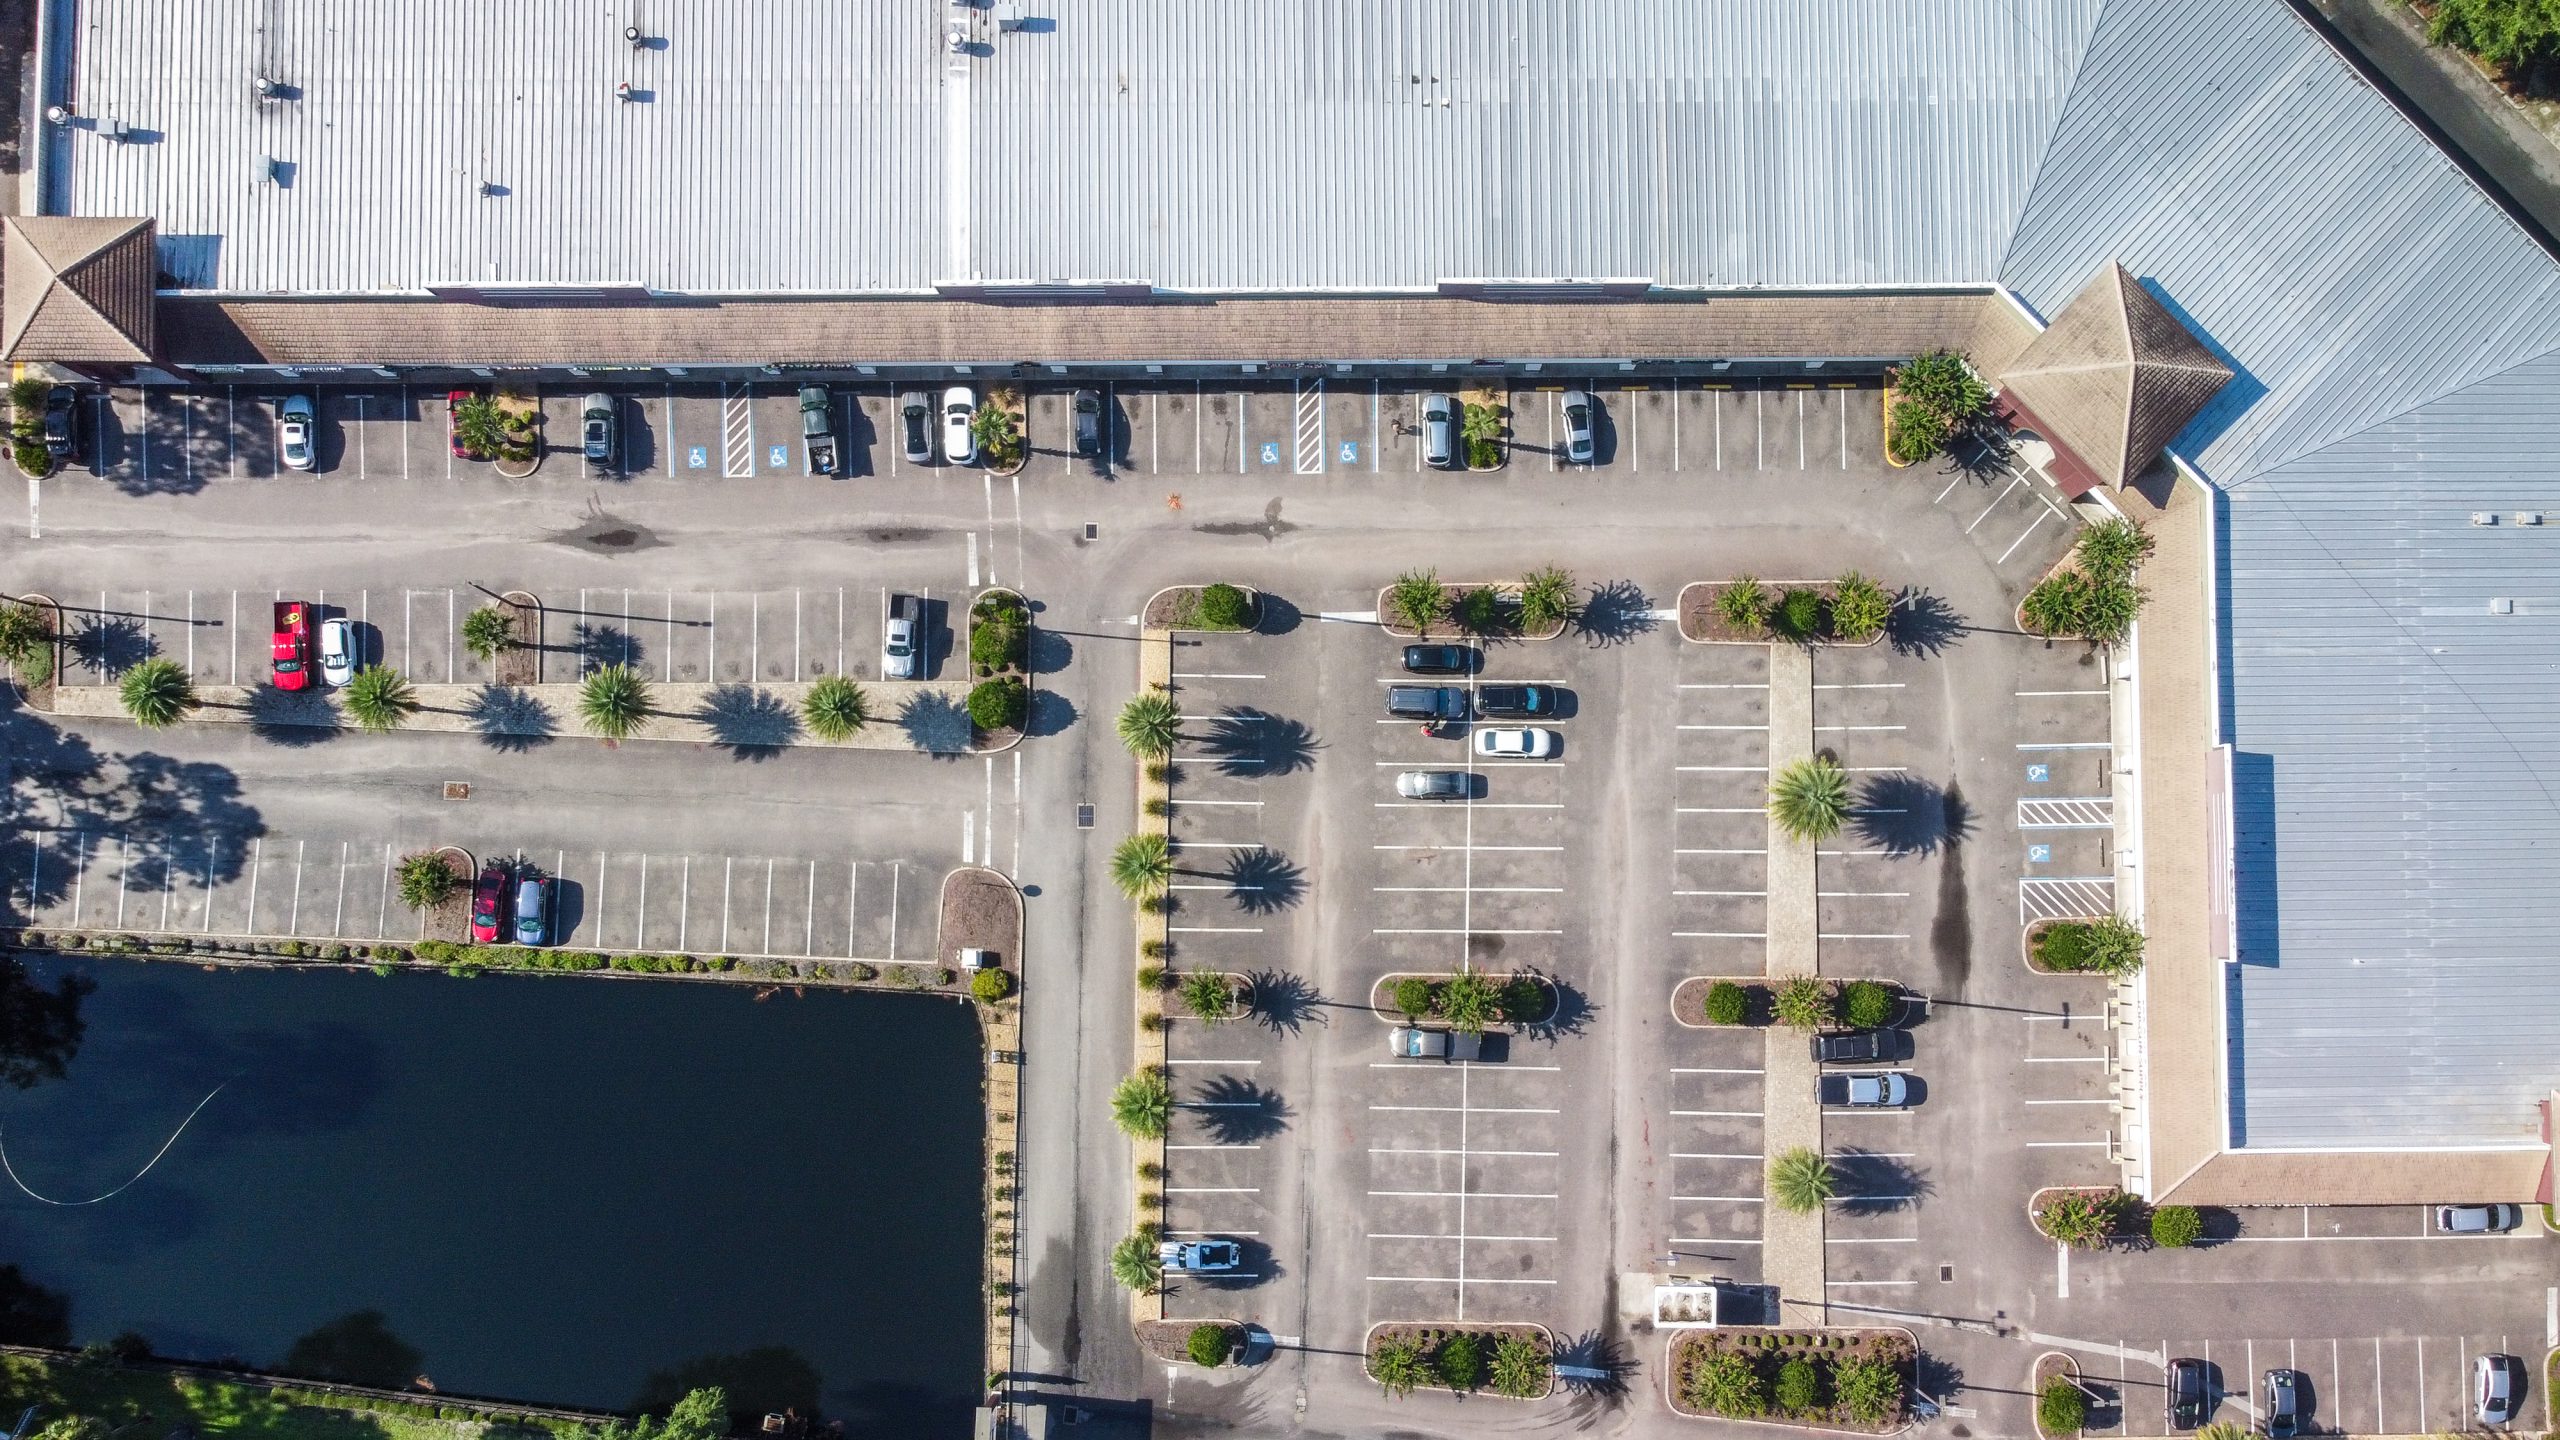 An aerial view of a retail center & parking lot.